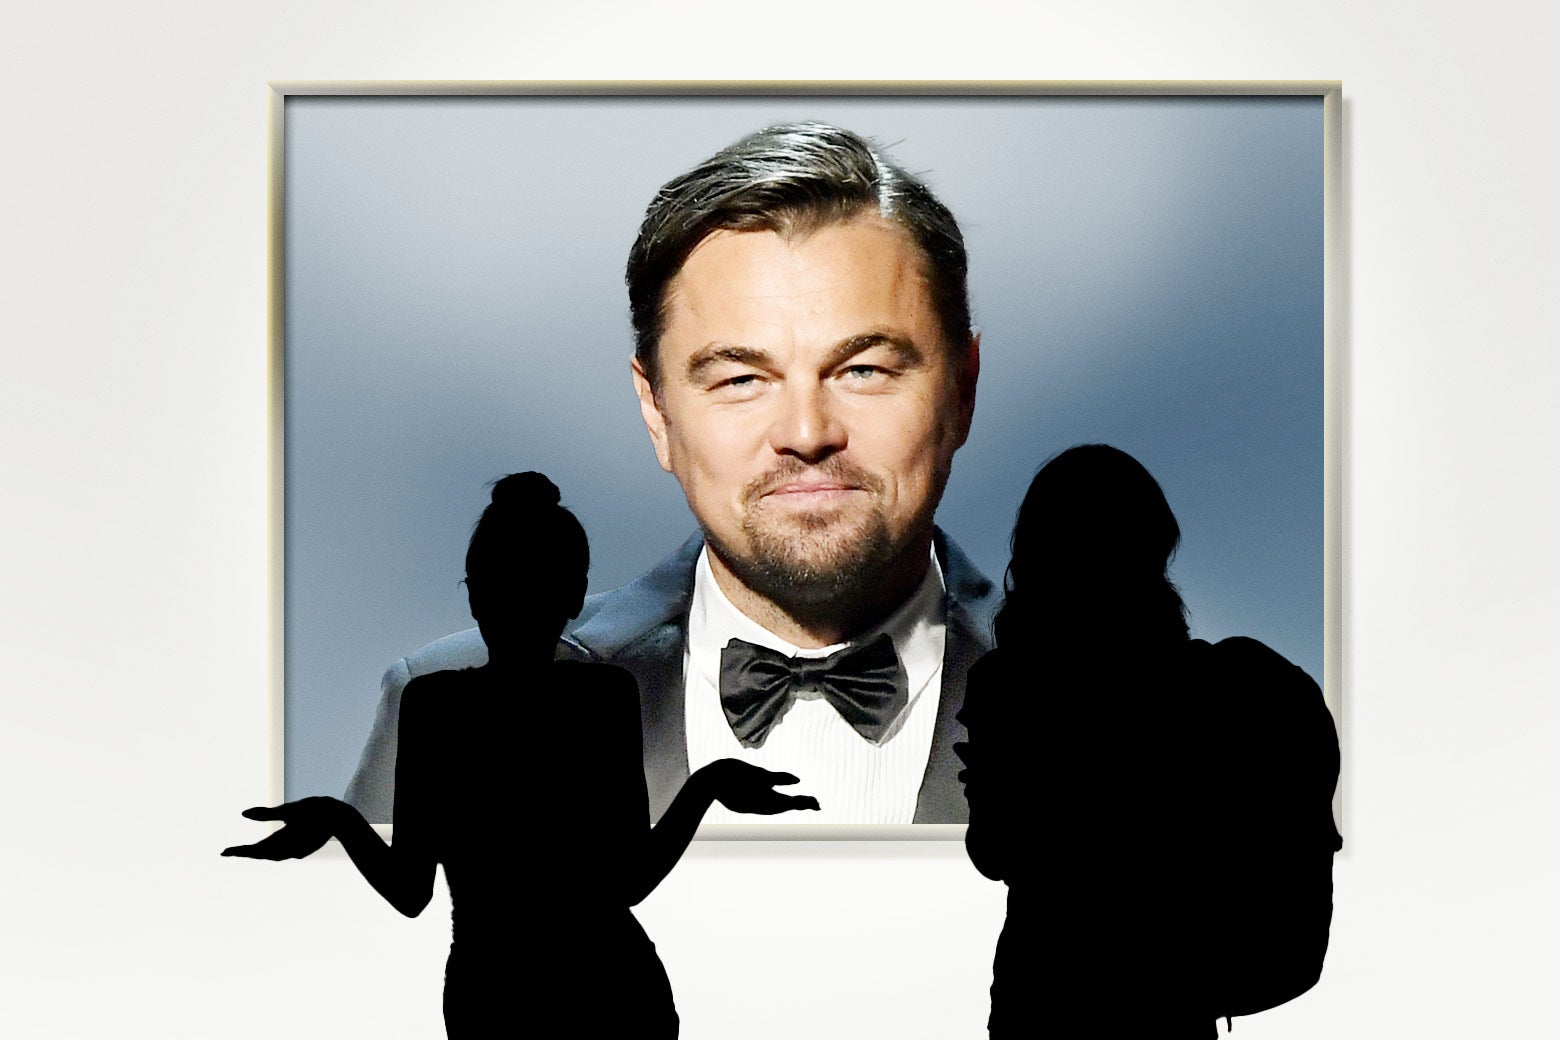 Two silhouettes of young women, one shrugging appear in front of a photo of Leonardo DiCaprio.